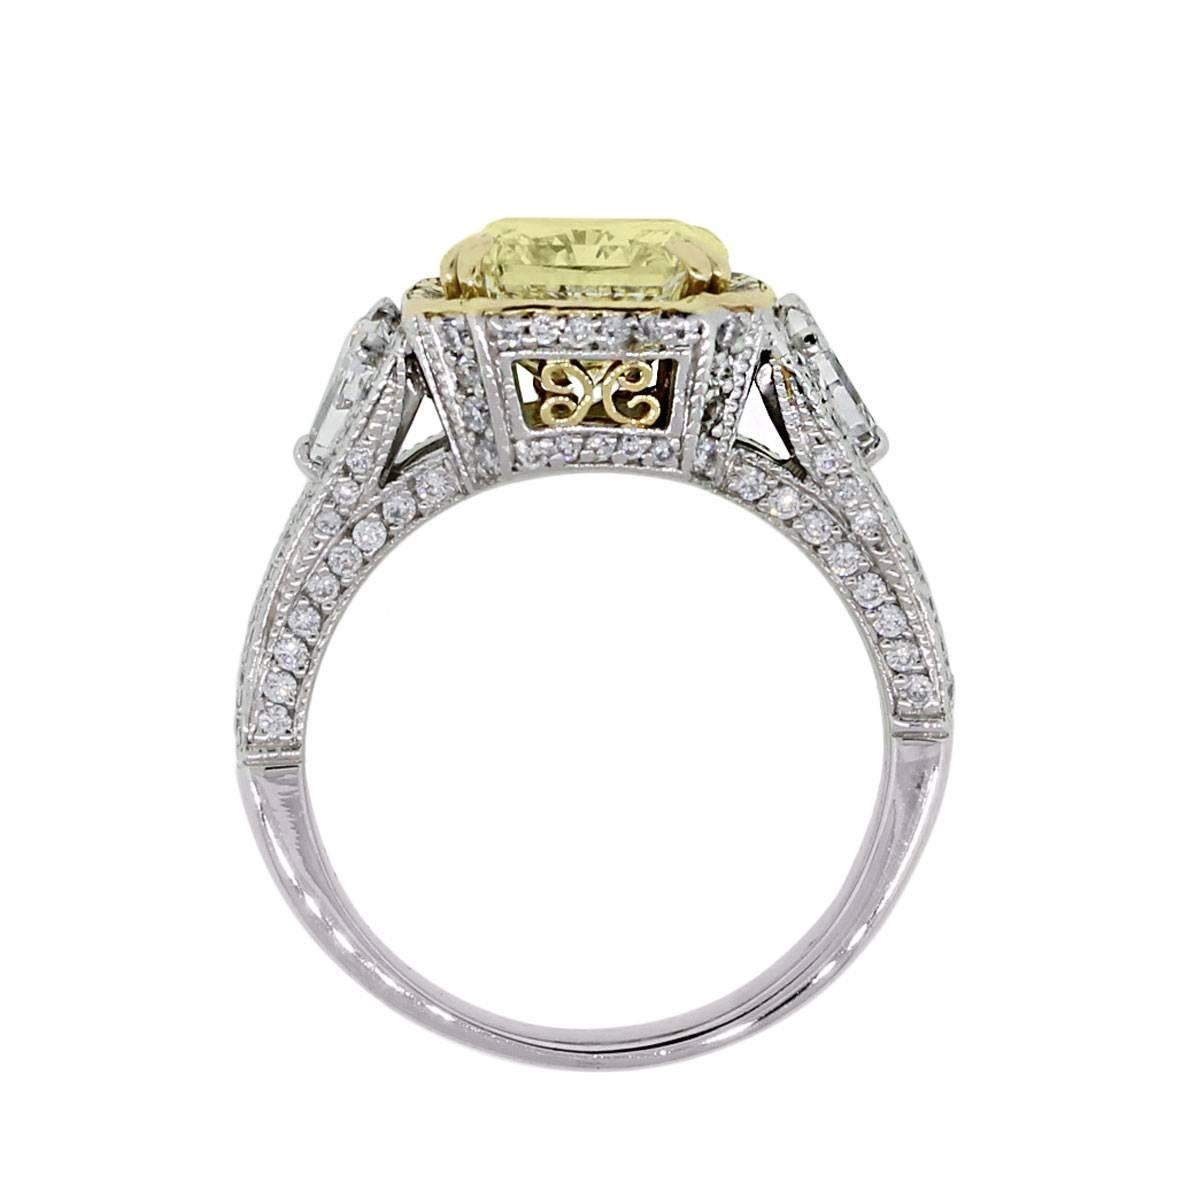 Designer: Gregg Ruth
Material: Platinum and 18k yellow gold
Center Diamond Details: Approximately 3.42ct radiant cut light fancy yellow diamond.
Diamond Details: Approximately 1.12ctw of trillion shape diamonds and round brilliant accent